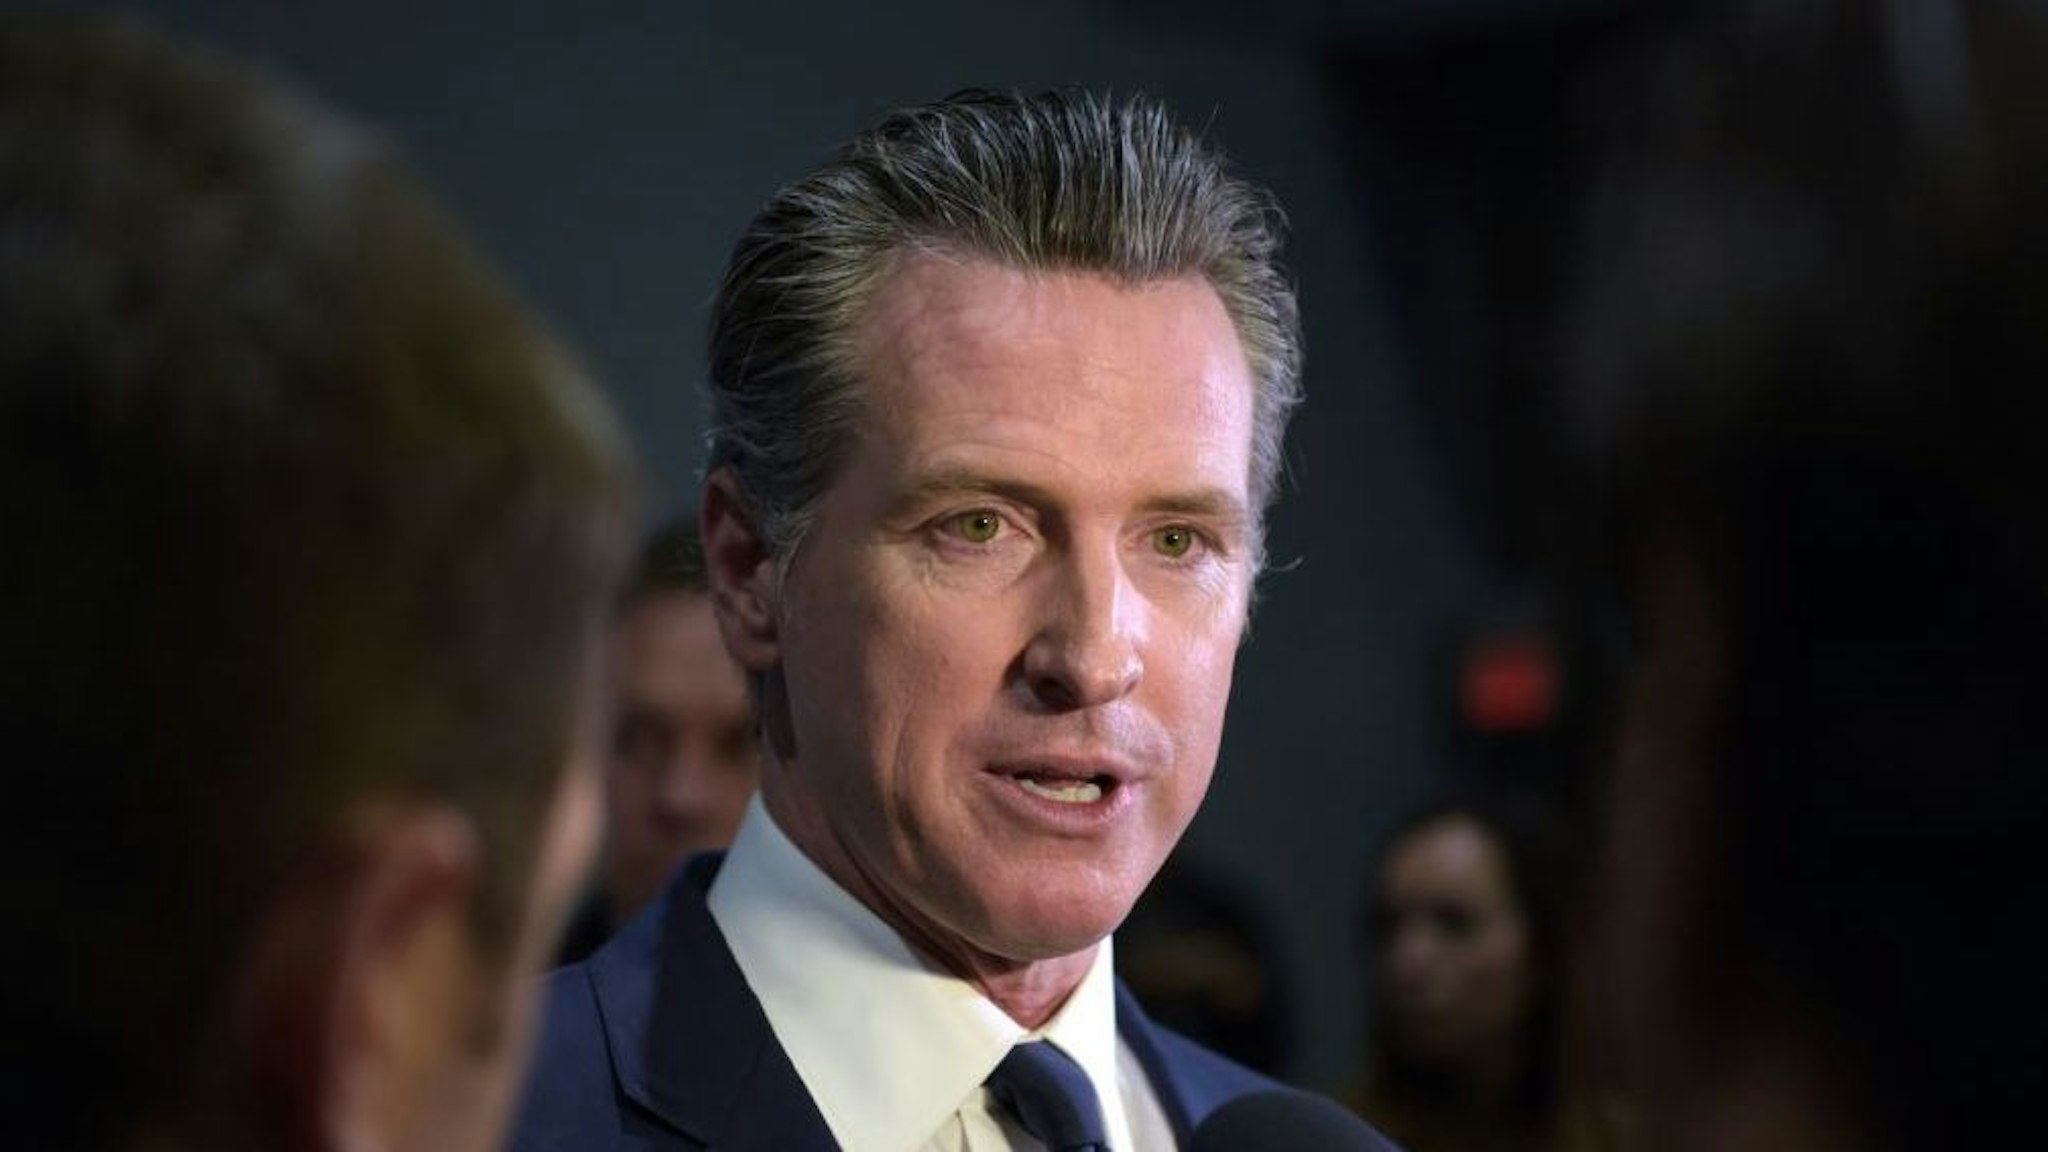 California Governor Gavin Newsom speaks to the press in the spin room after the sixth Democratic primary debate of the 2020 presidential campaign season co-hosted by PBS NewsHour &amp; Politico at Loyola Marymount University in Los Angeles, California on December 19, 2019.